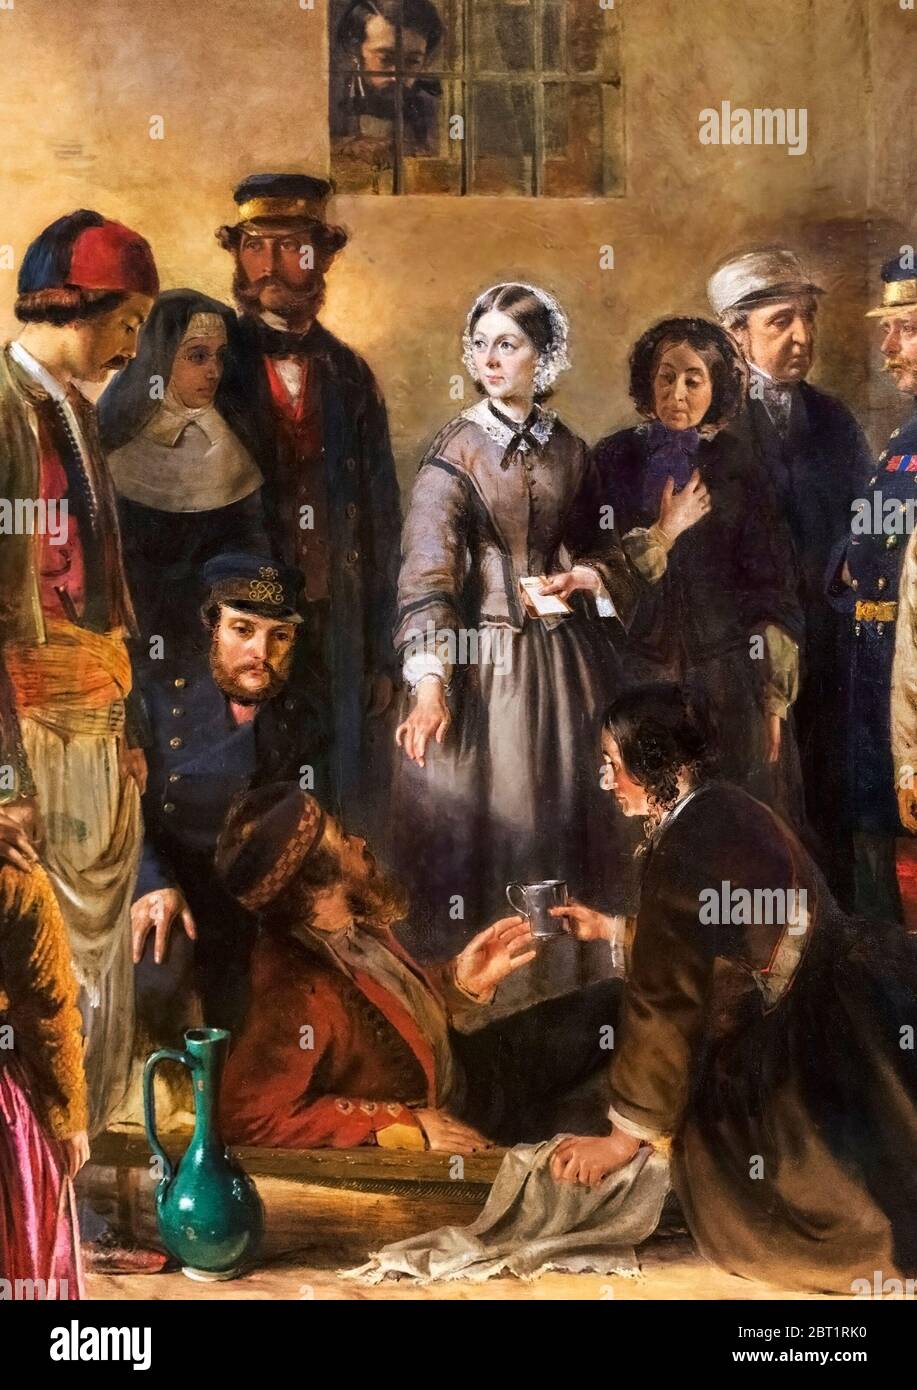 'The Mission of Mercy: Florence Nightingale receiving the Wounded at Scutari' by Jerry Barrett, oil on canvas, 1857. Stock Photo